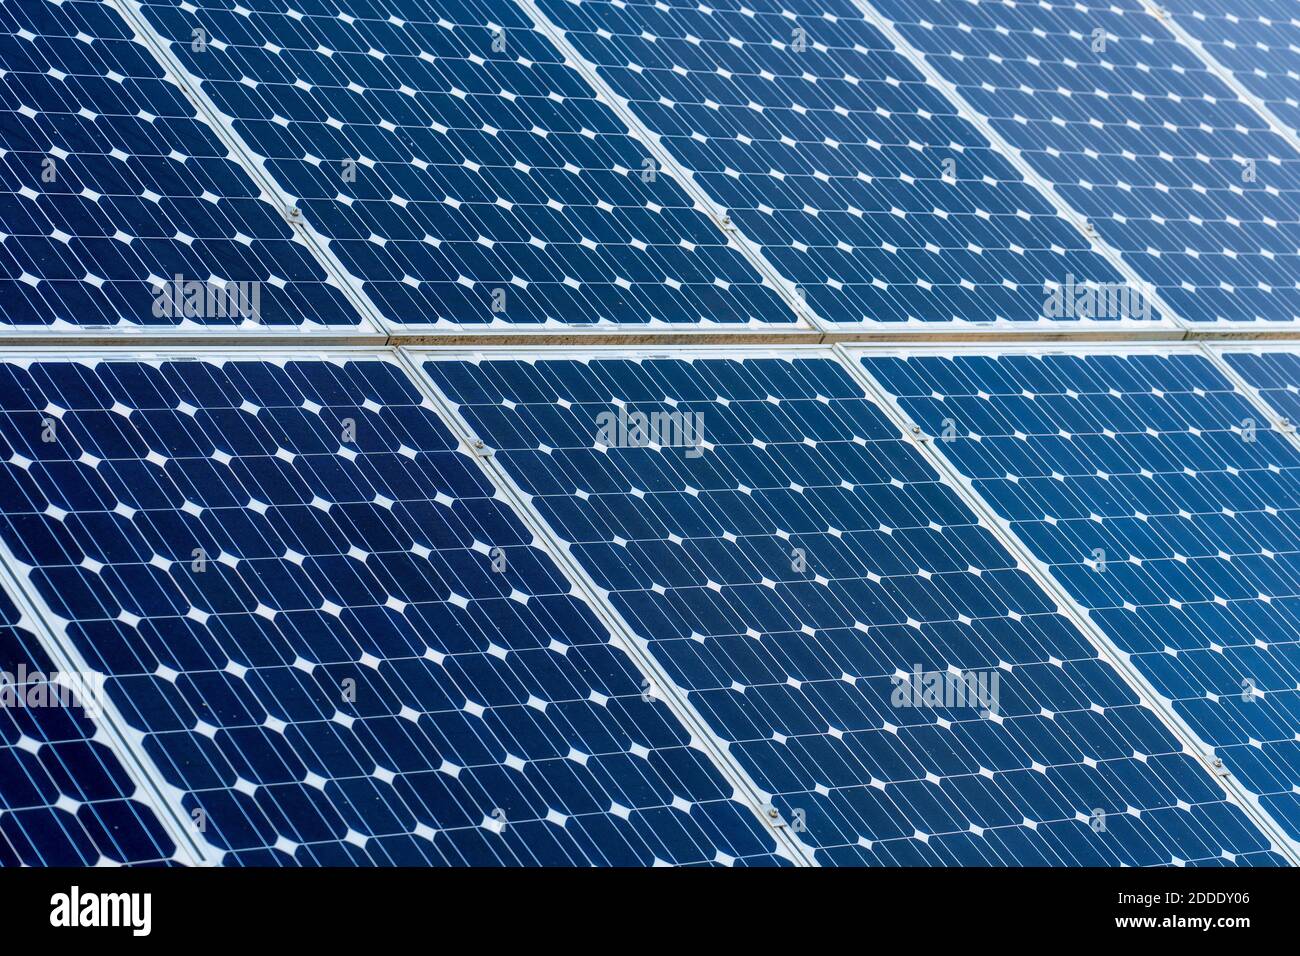 Clean energy photovoltaic panels, detail of solar panels, alternative electricity source Stock Photo